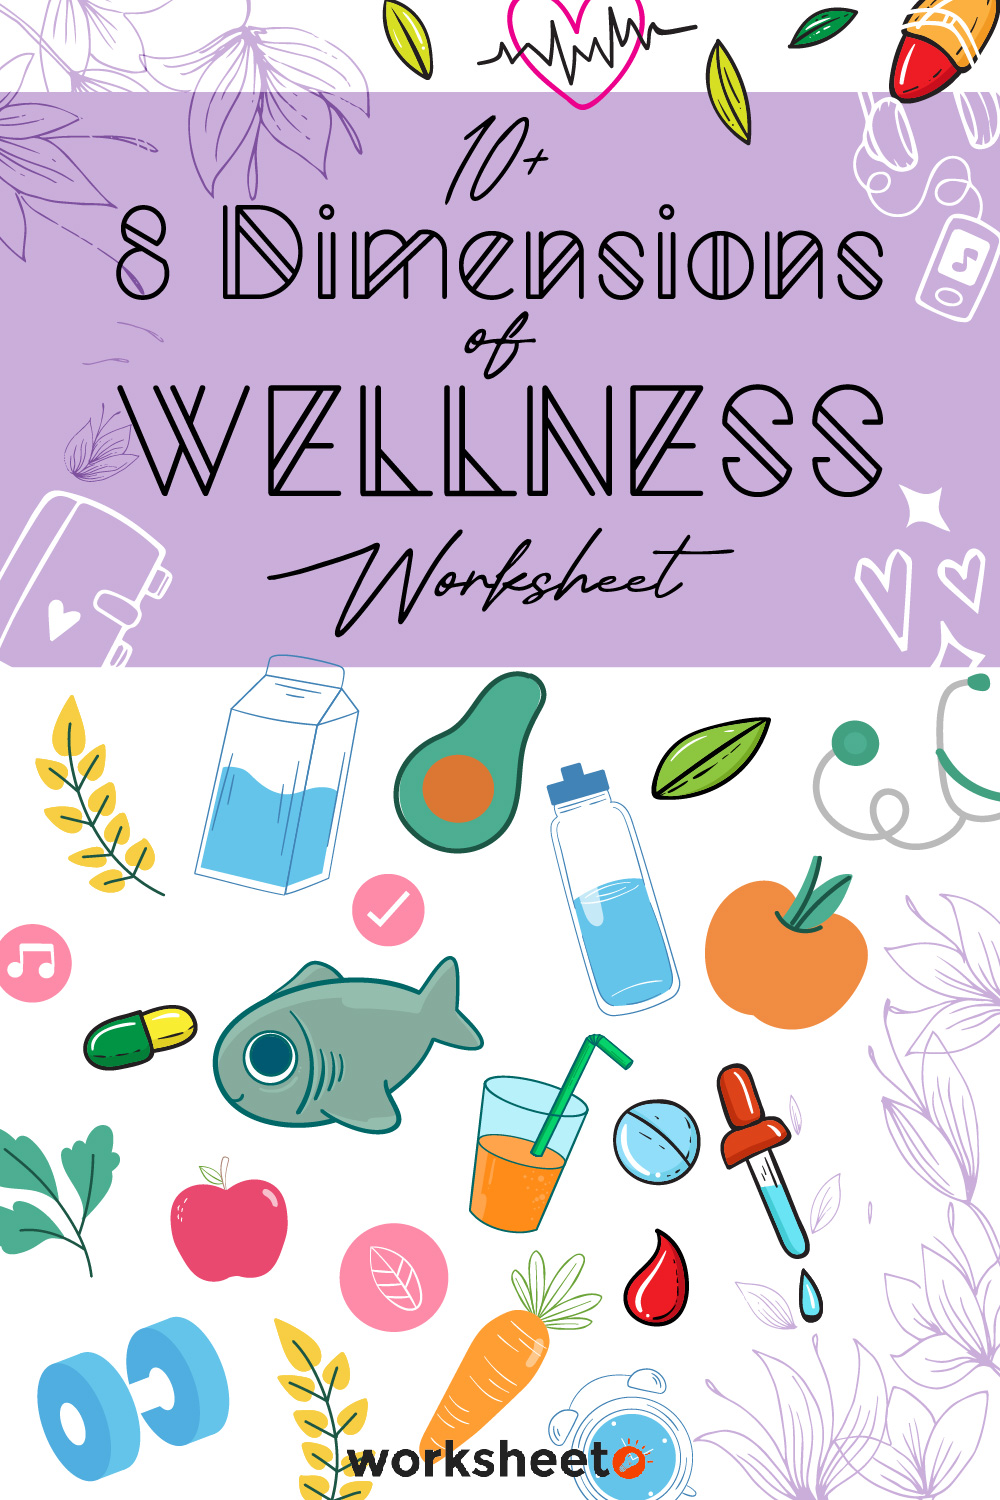 14 Images of 8 Dimensions Of Wellness Worksheet